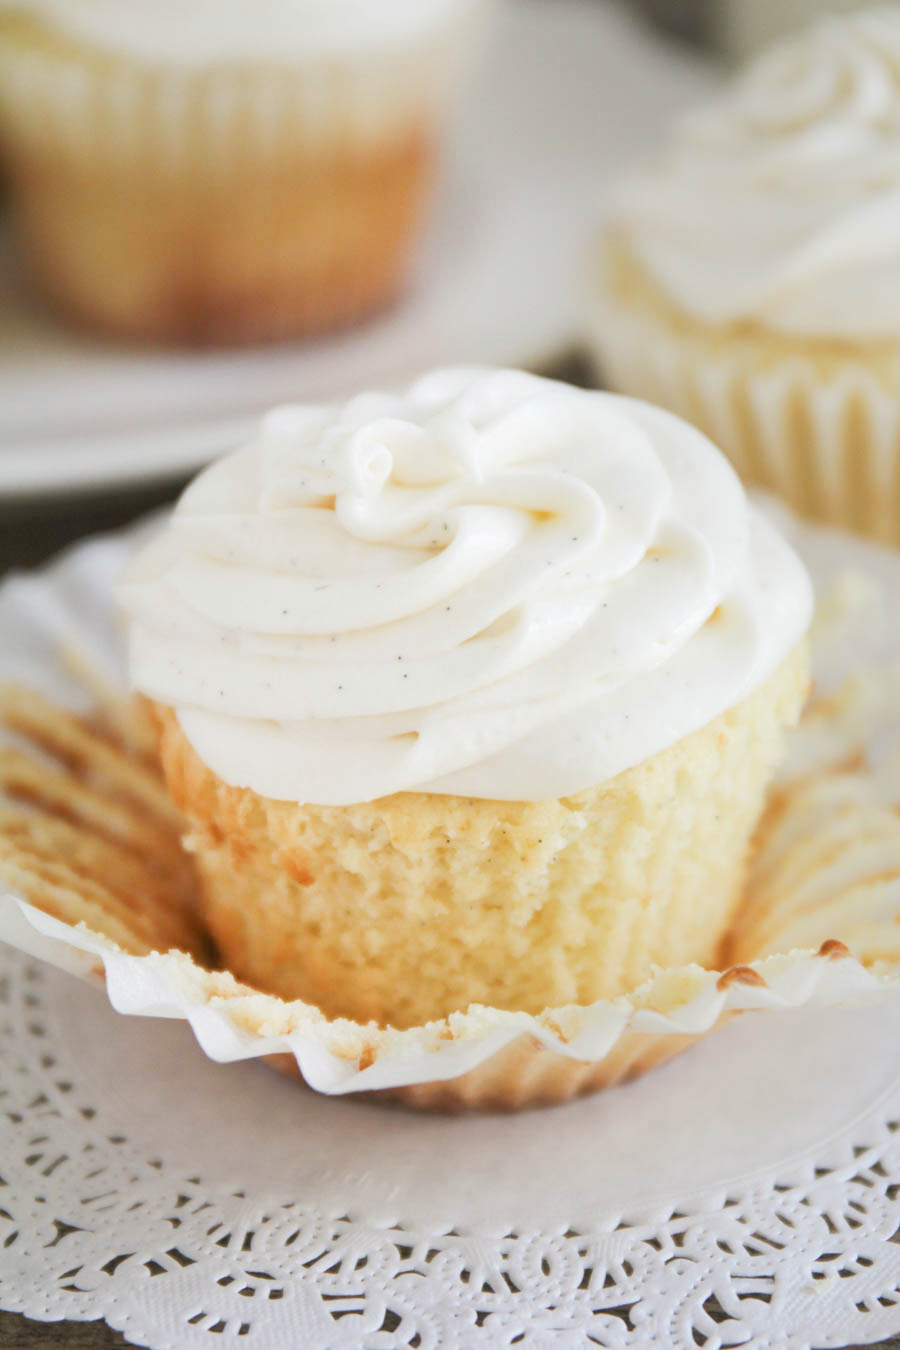 These vanilla bean cupcakes are light and moist, with the perfect tender crumb. The perfect vanilla cupcake!